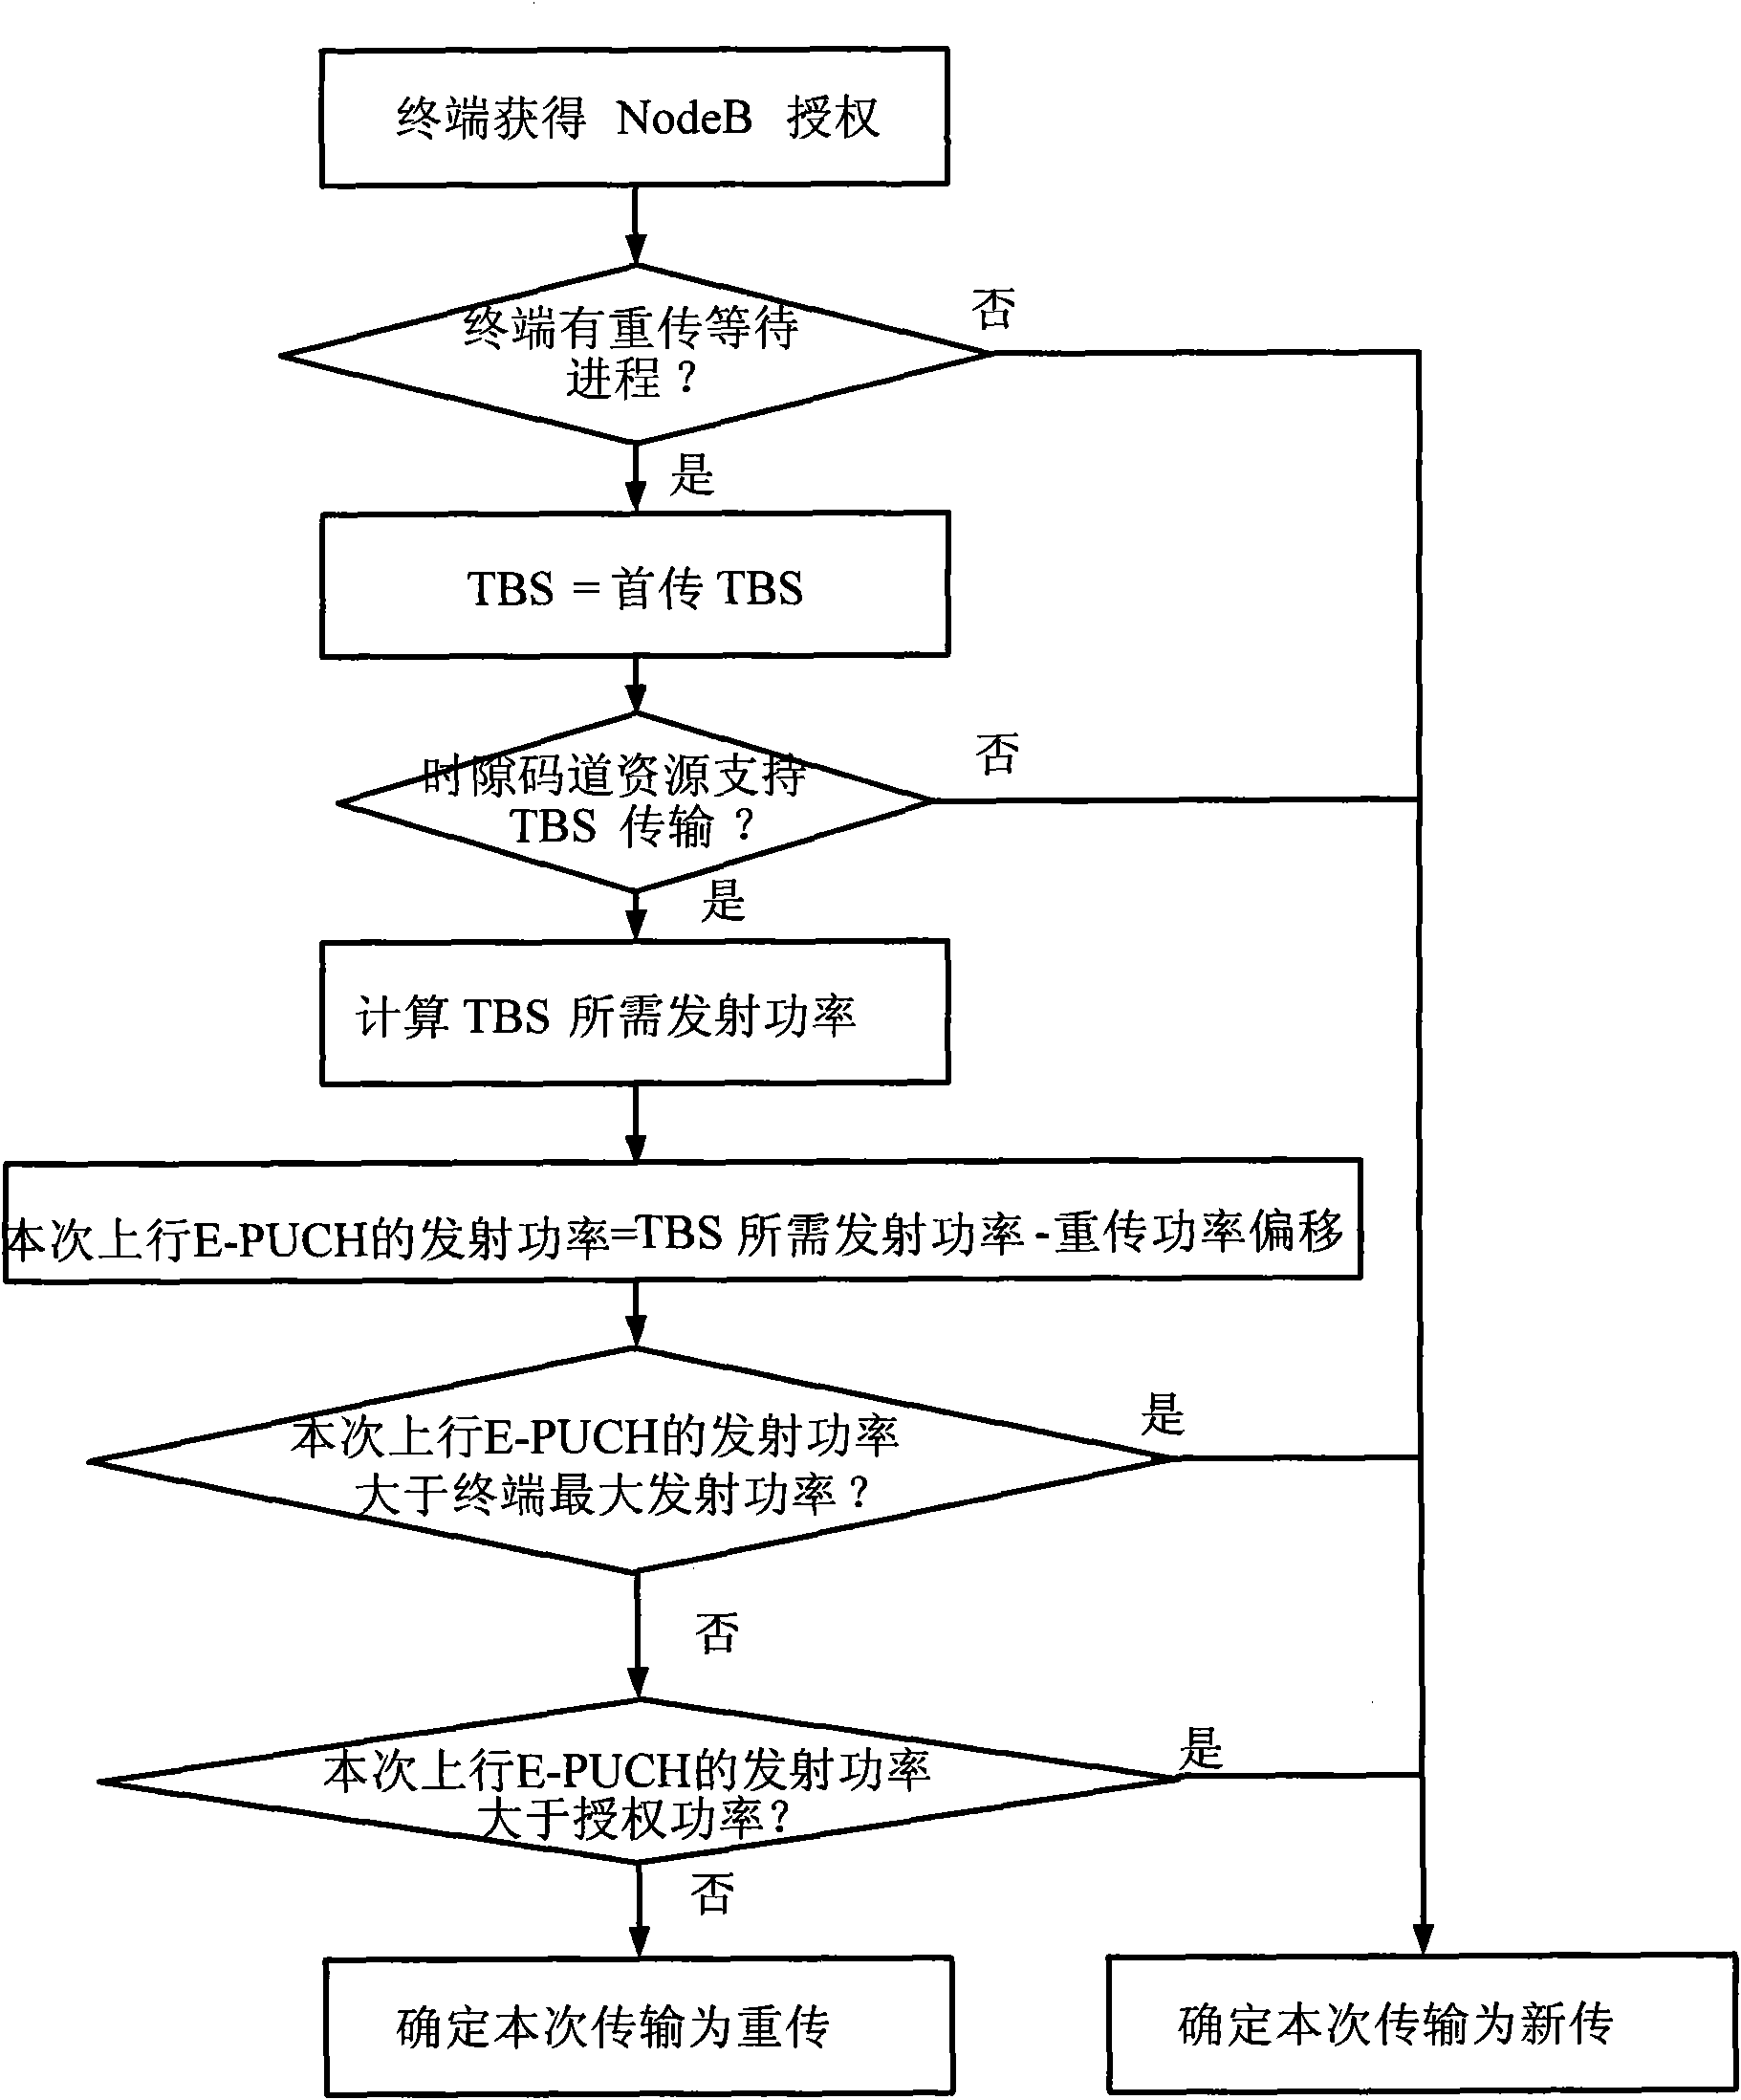 Retransmission method and device of high-speed uplink packet access terminal